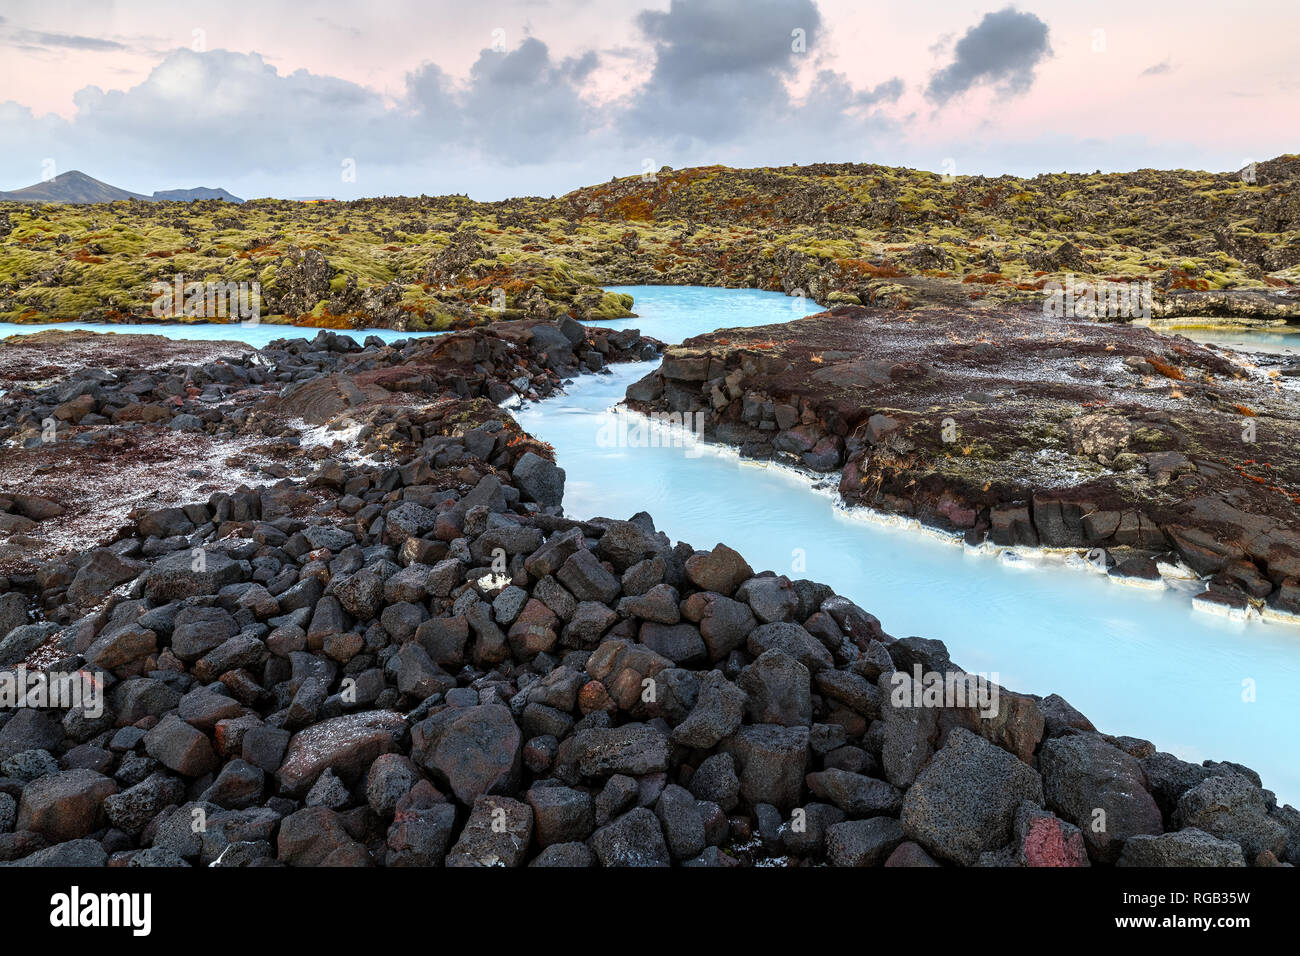 Dramatic landscape of a beautiful volcanic terrain with black volcanic rocks and turquoise water at Blue Lagoon near Grindavik in Reykjanes peninsula  Stock Photo